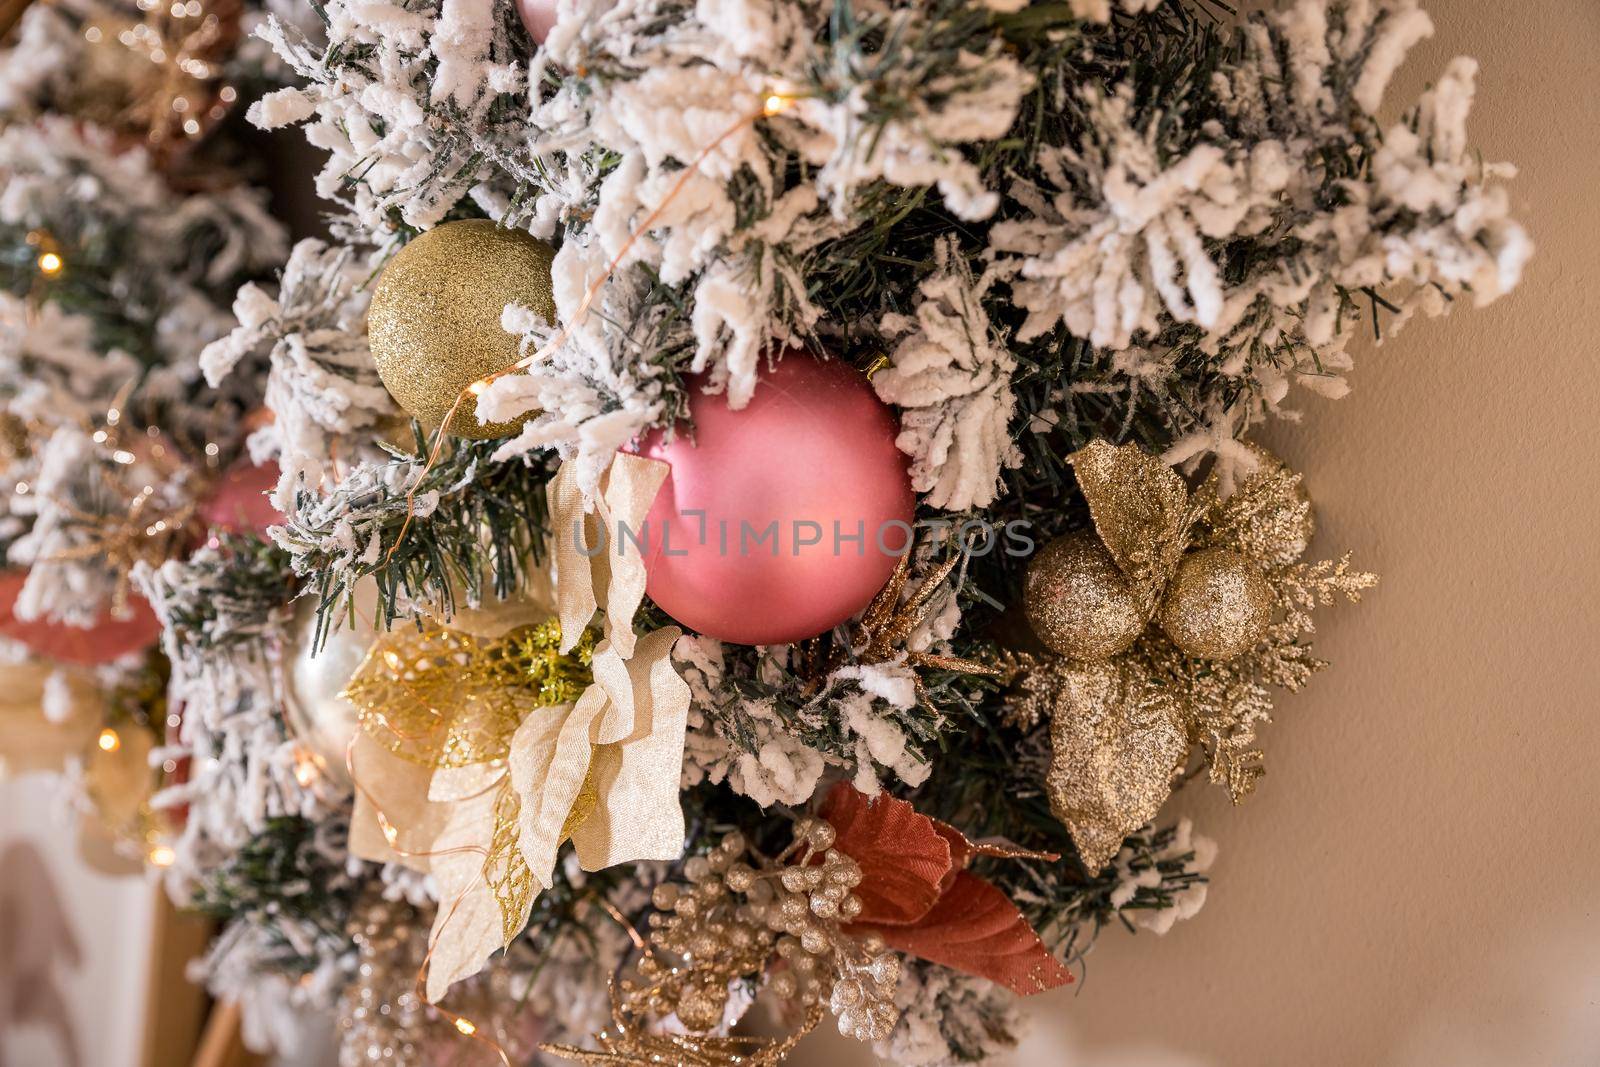 fir branches hanging on a beige wall. Wreath with natural ornaments: bumps, walnuts, cones.